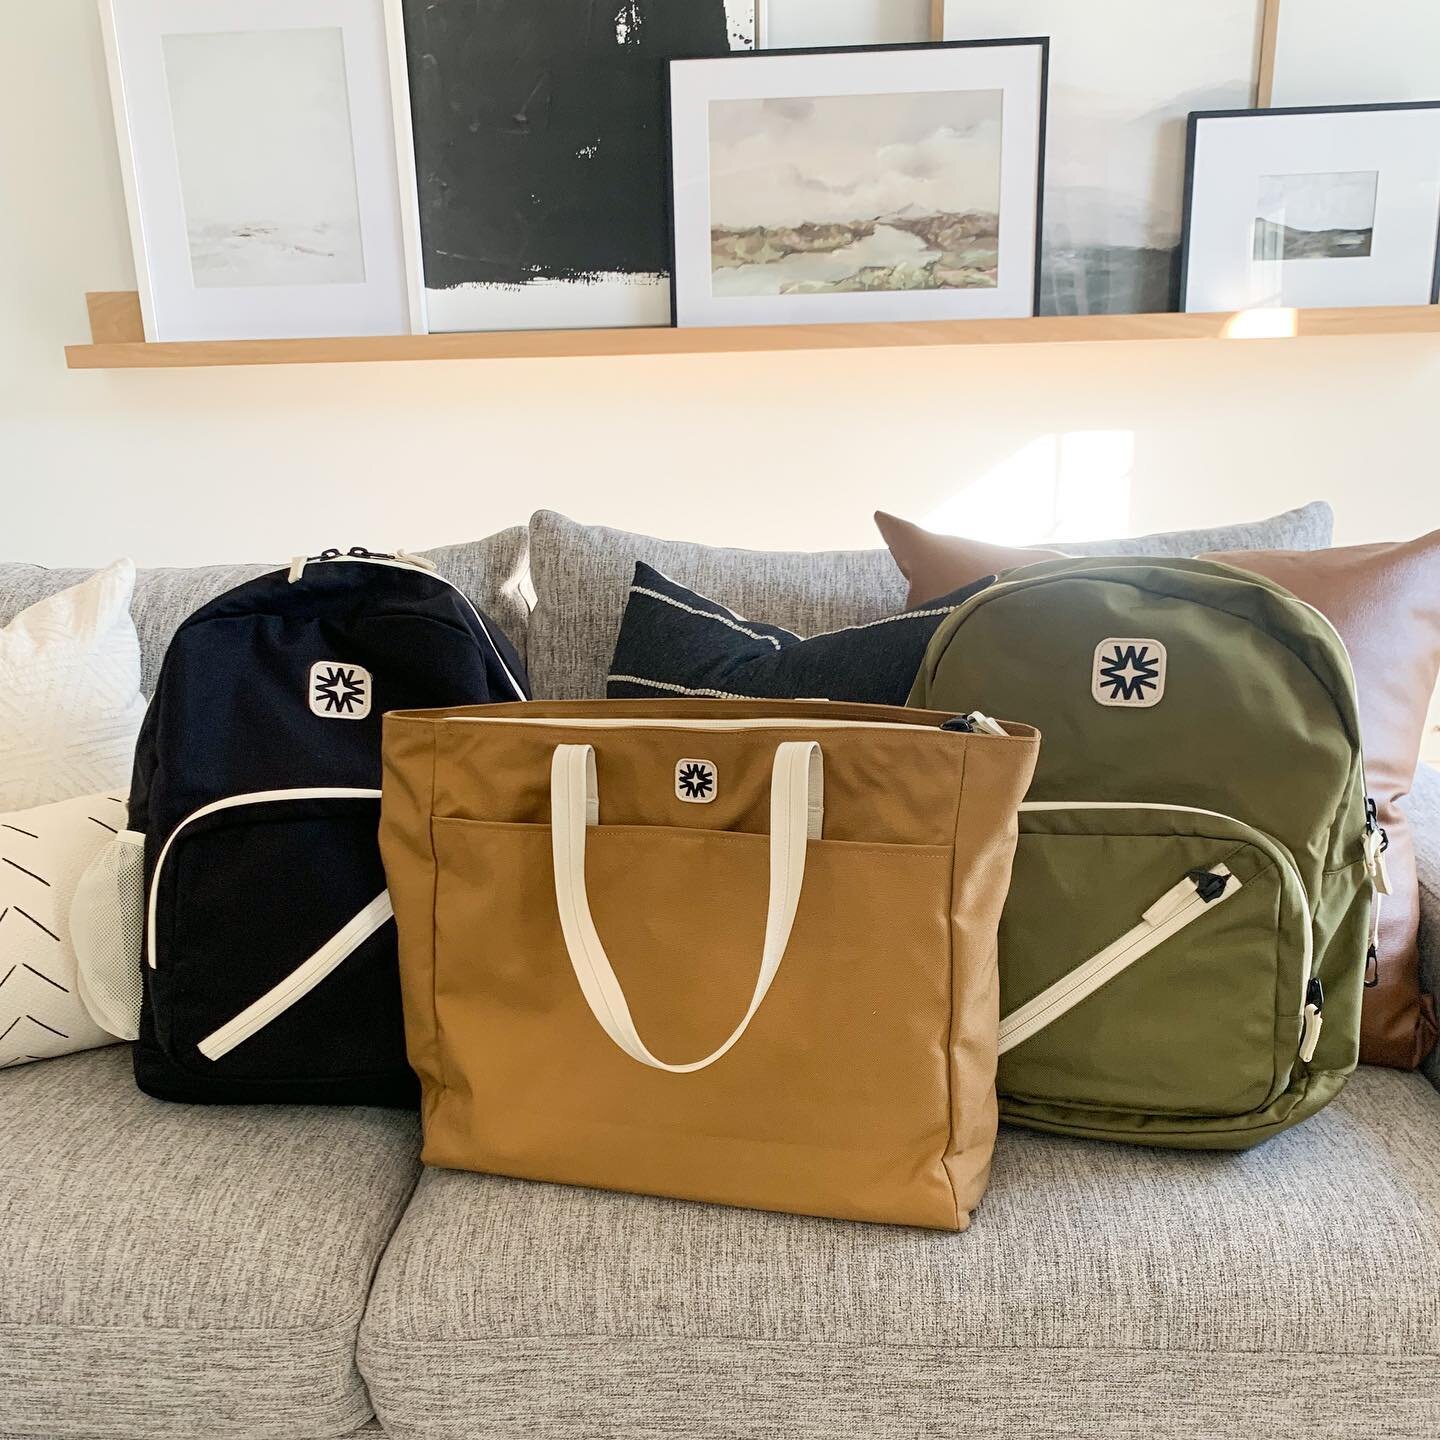 Ok, ok @walkerfamilygoods, I&rsquo;m hooked. We&rsquo;re weekend road trip ready with our new bags that I&rsquo;ve been eyeing foreverrrr. I grabbed the Valley tote in honey for myself and it&rsquo;s the most perfect homeschool mama bag of dreams eve